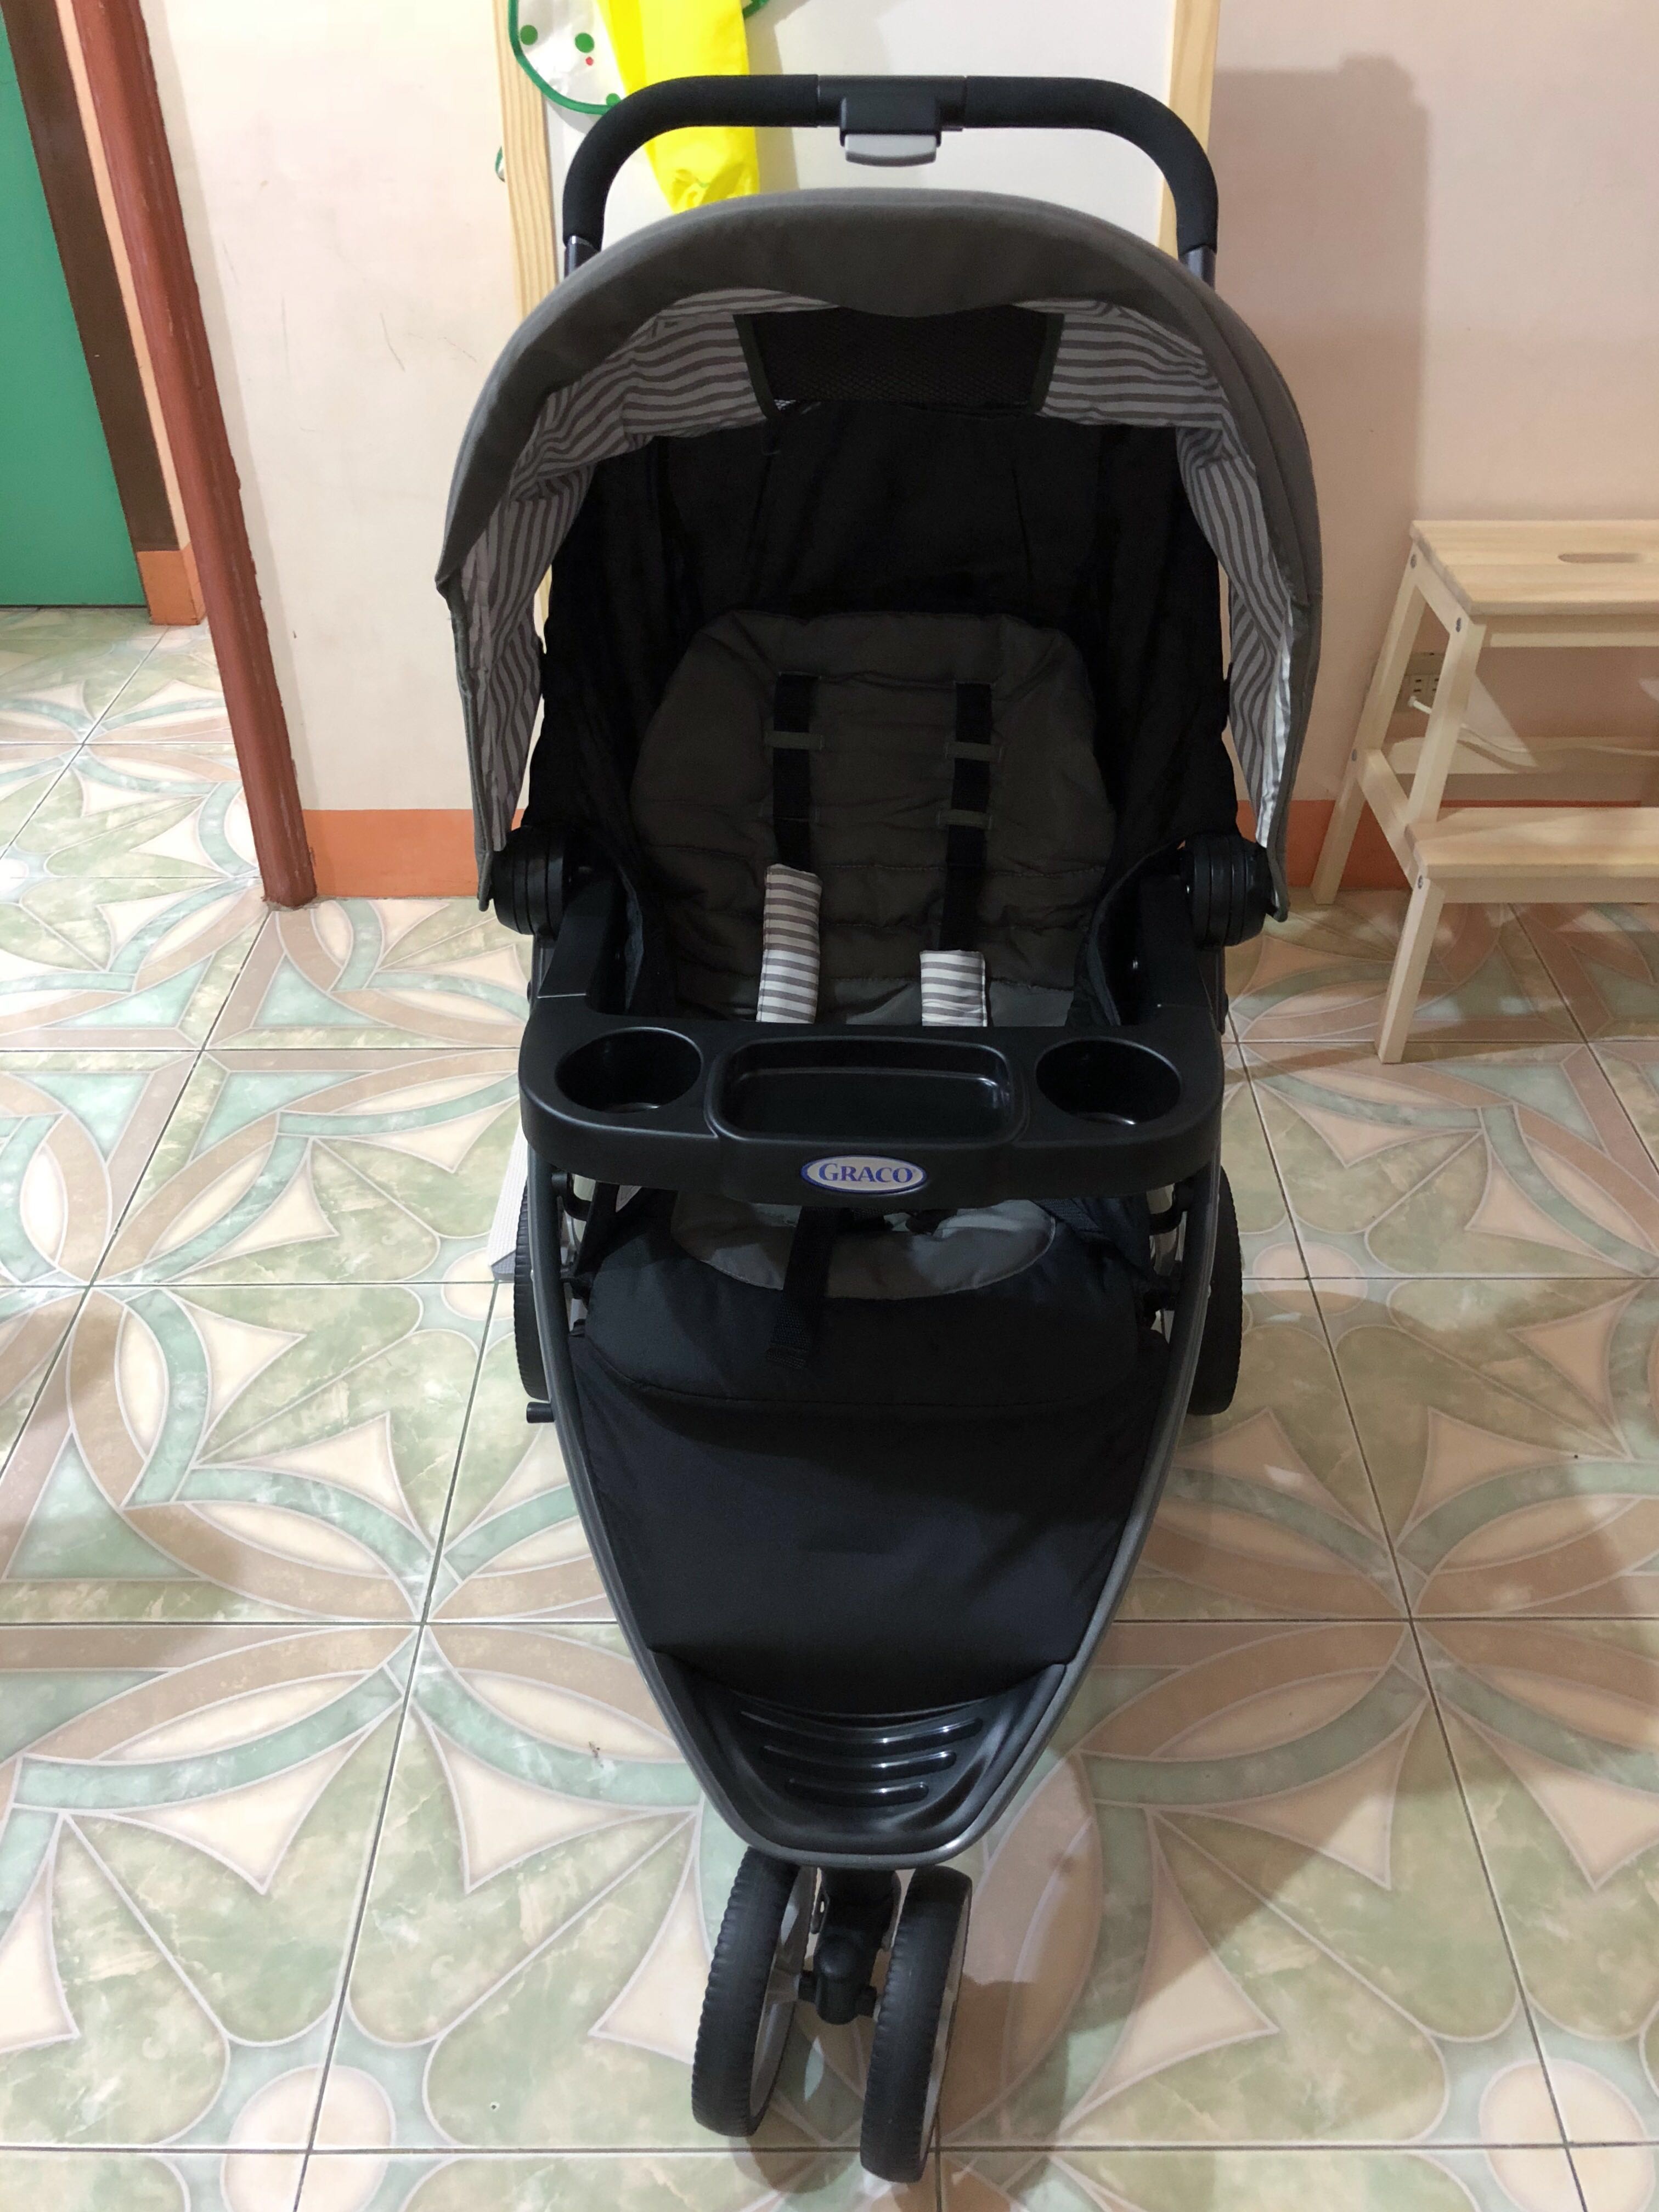 graco pace travel system pipp